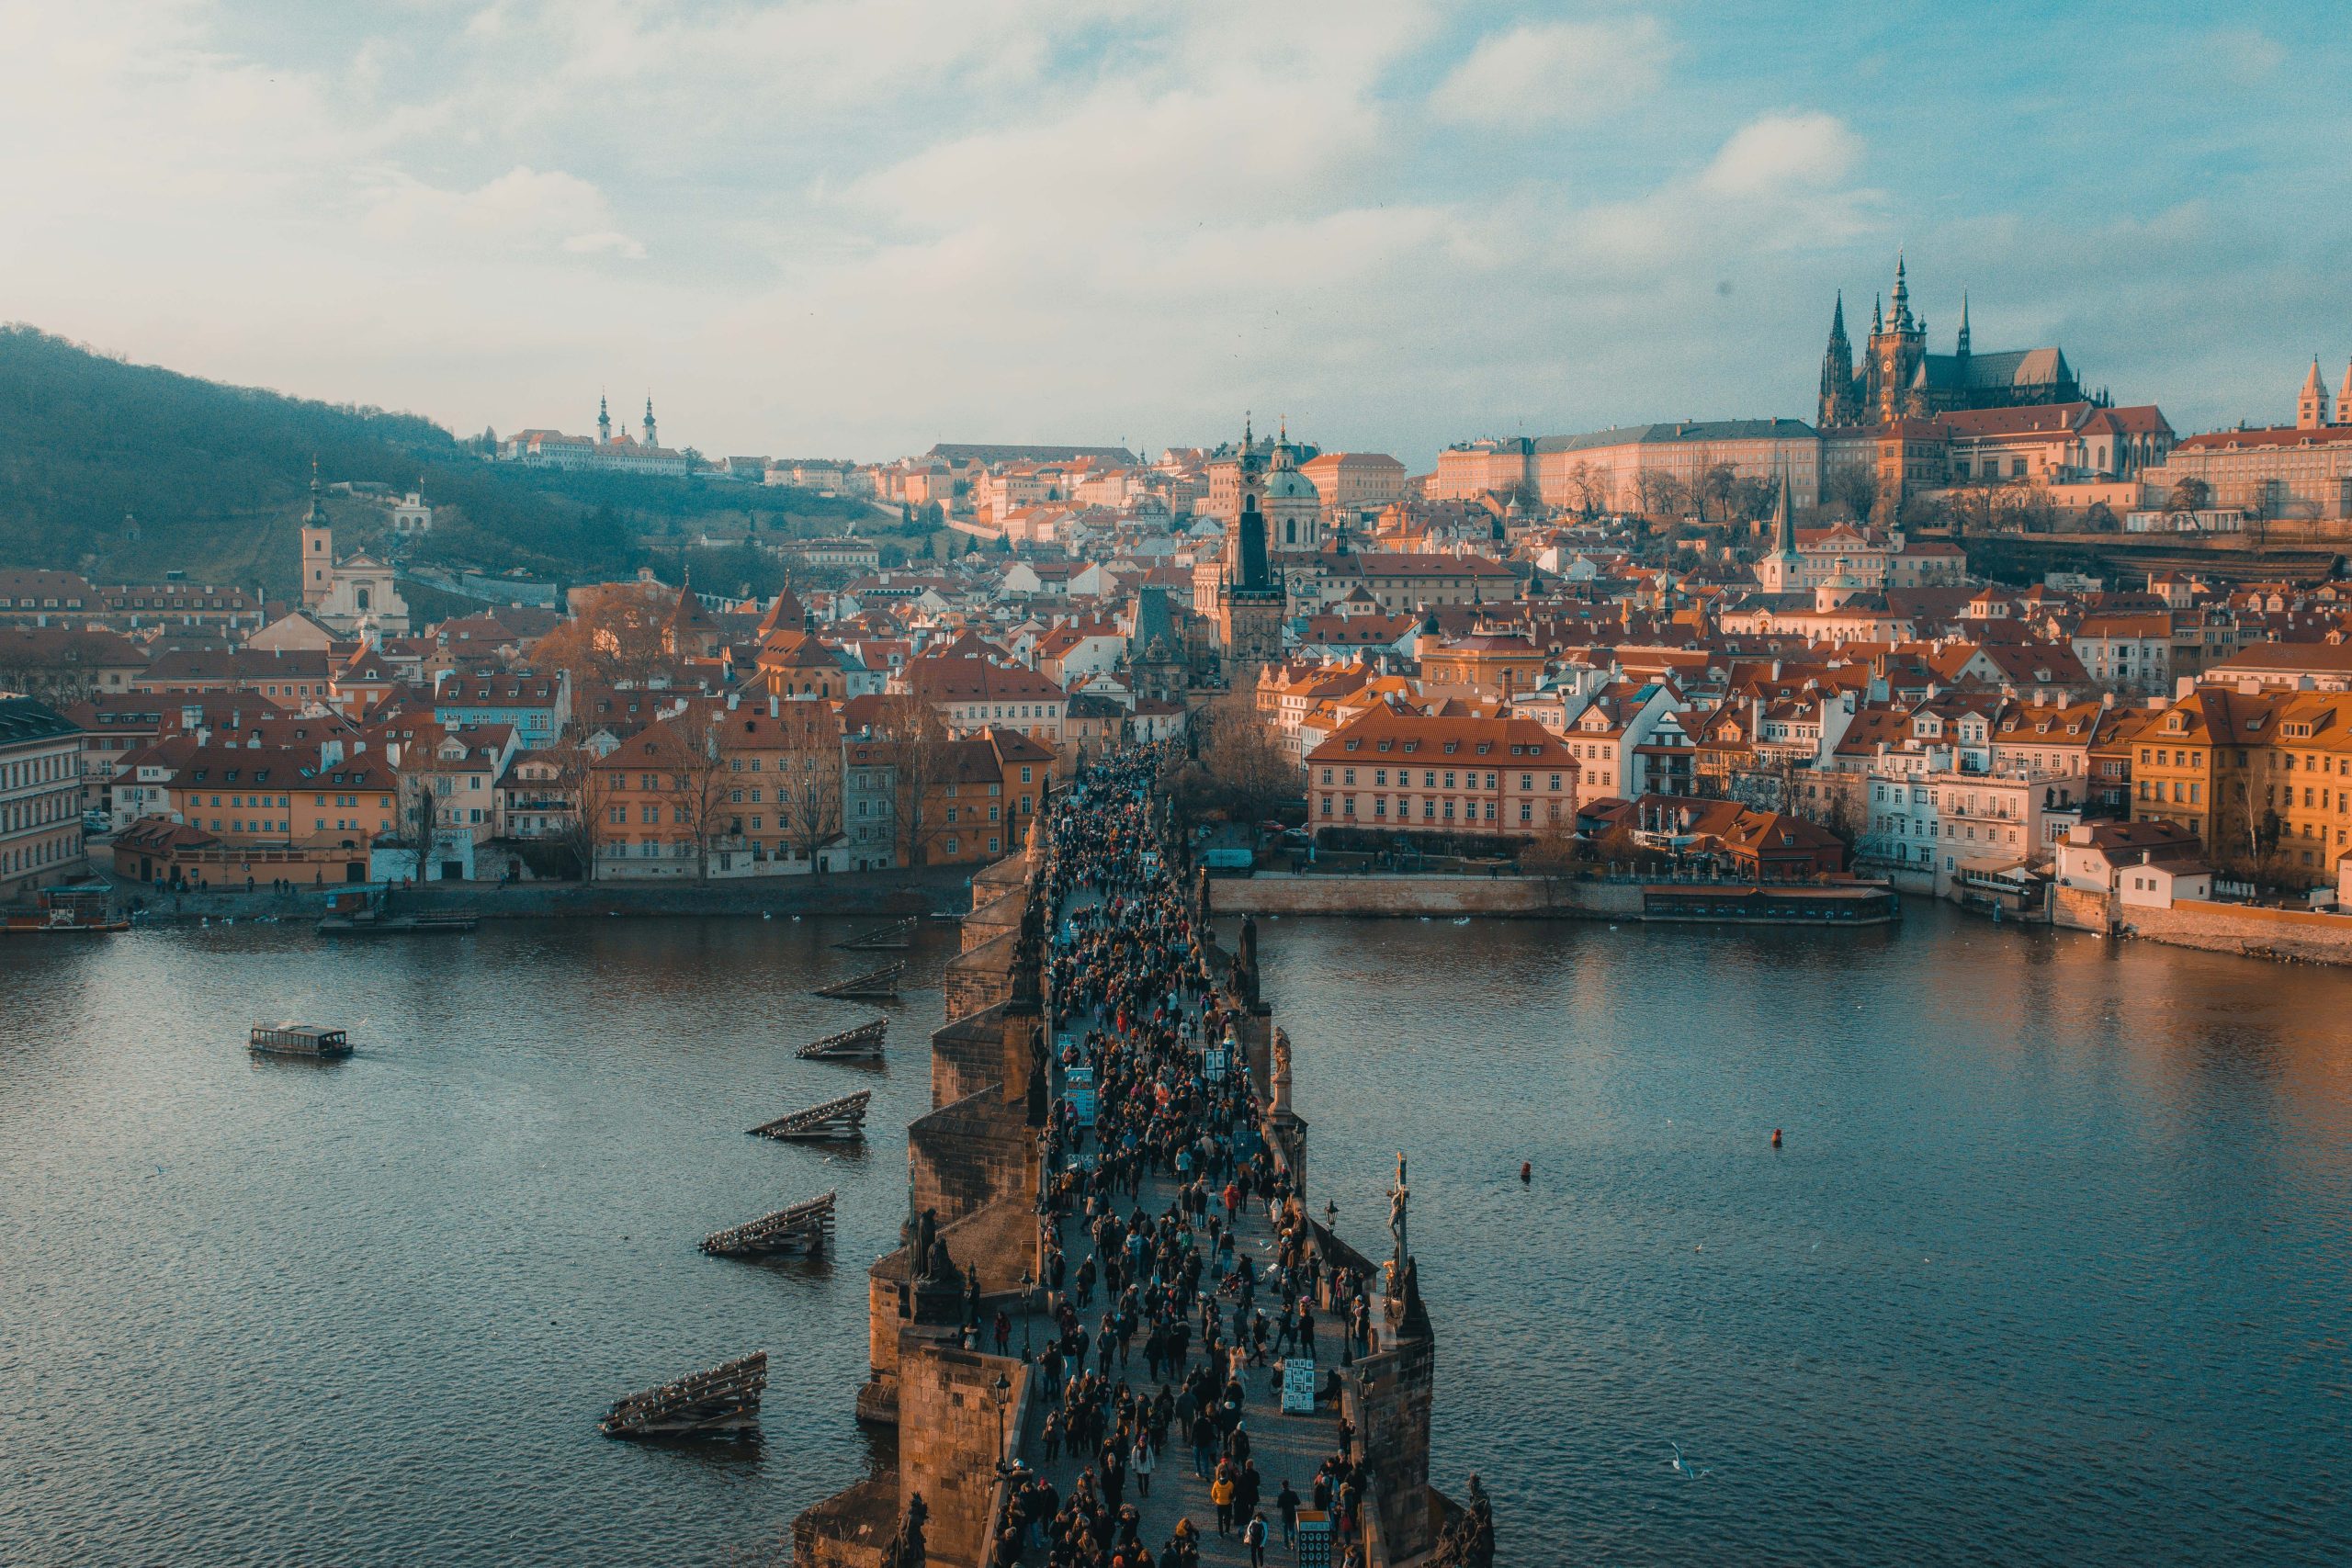 The University of Arkansas at Little Rock International Business Program is offering a study abroad trip to Prague, Czech Republic, that will highlight the country’s culture, business, and entrepreneurship during spring break 2019.